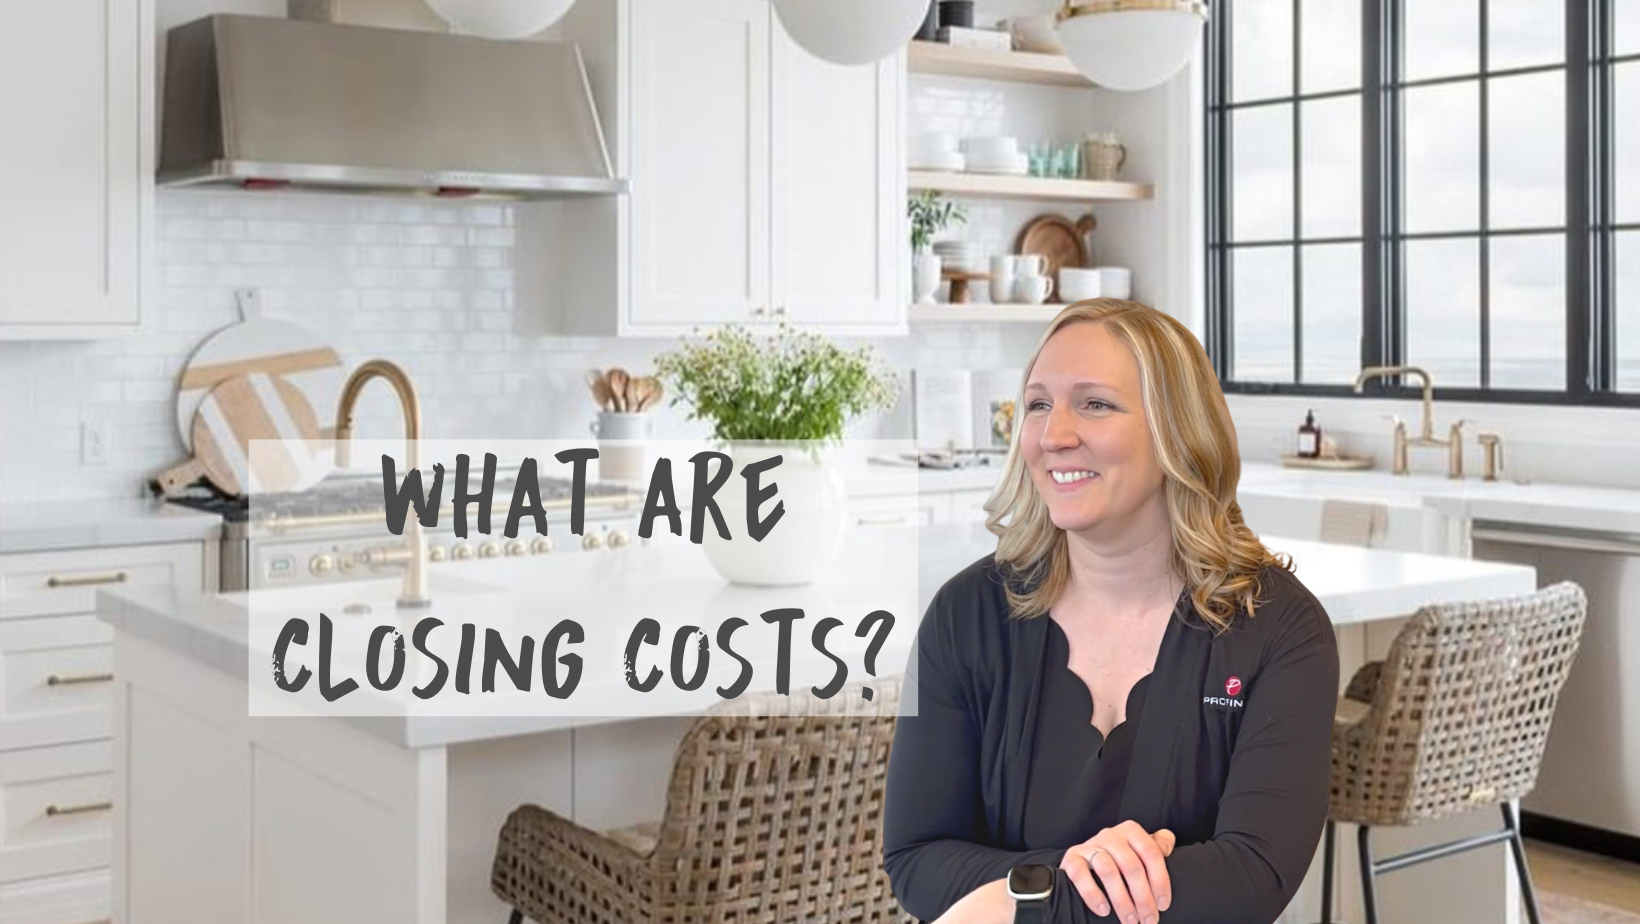 Video Tutorial with Erica explaining closing costs